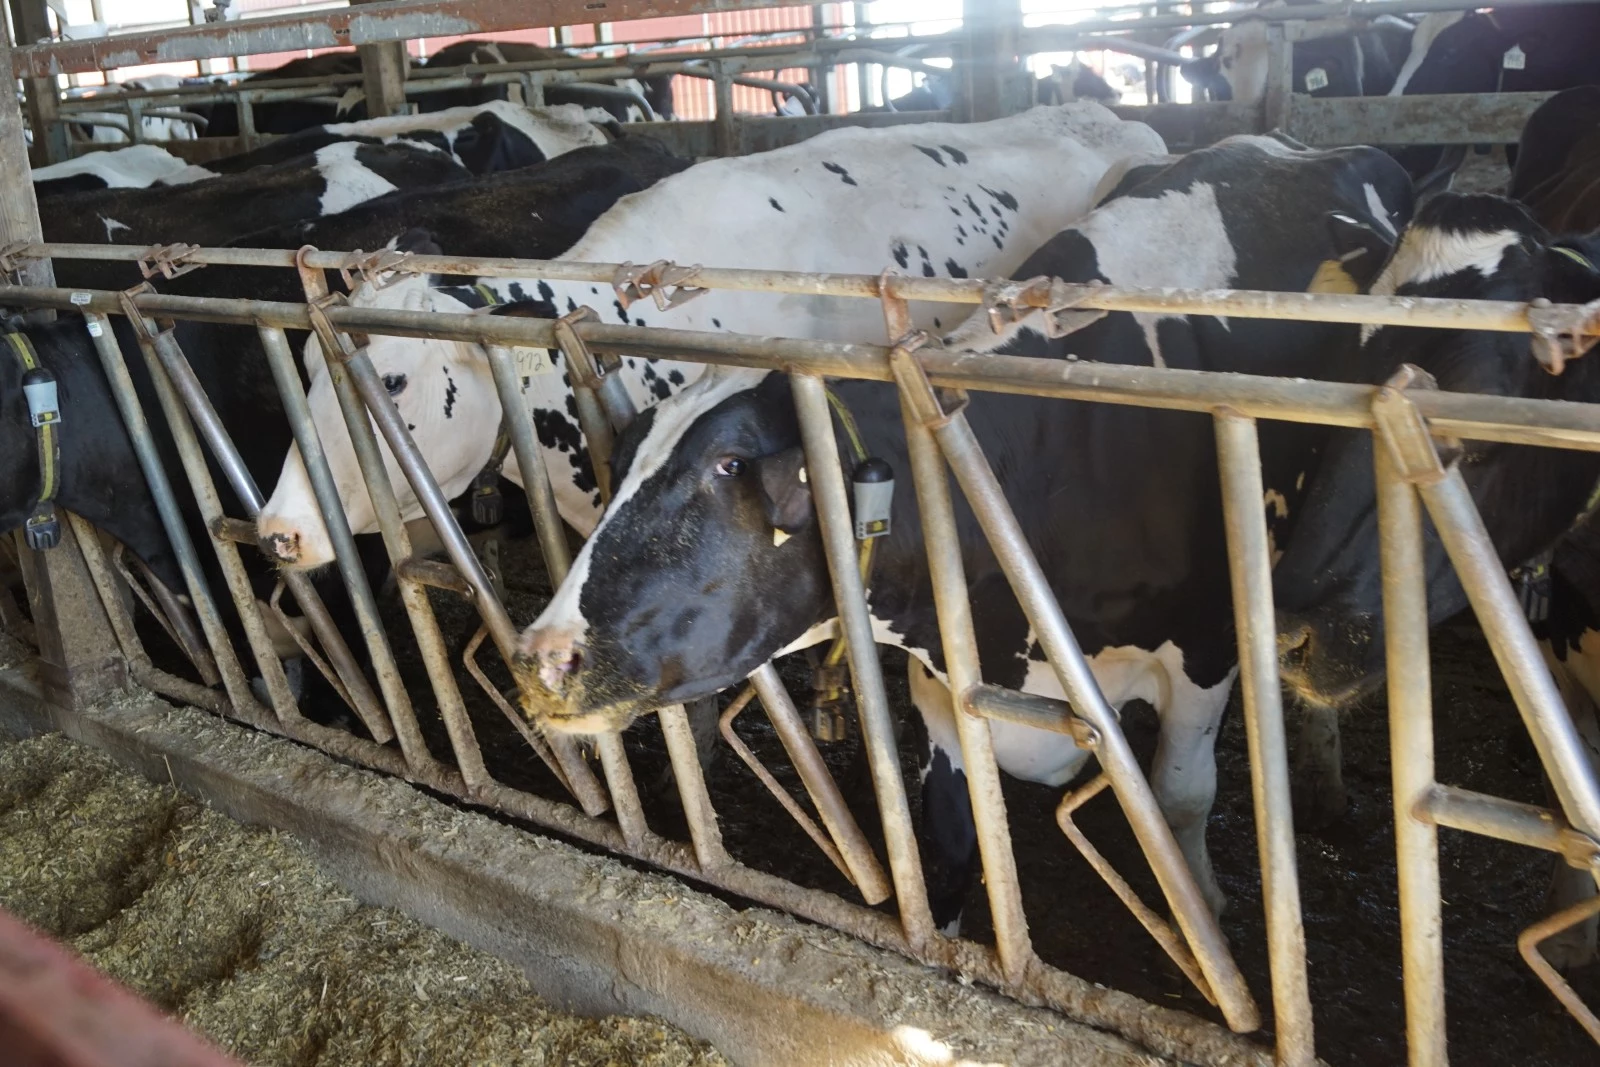 Bird Flu Moves to Dairy Cattle – What To Look For